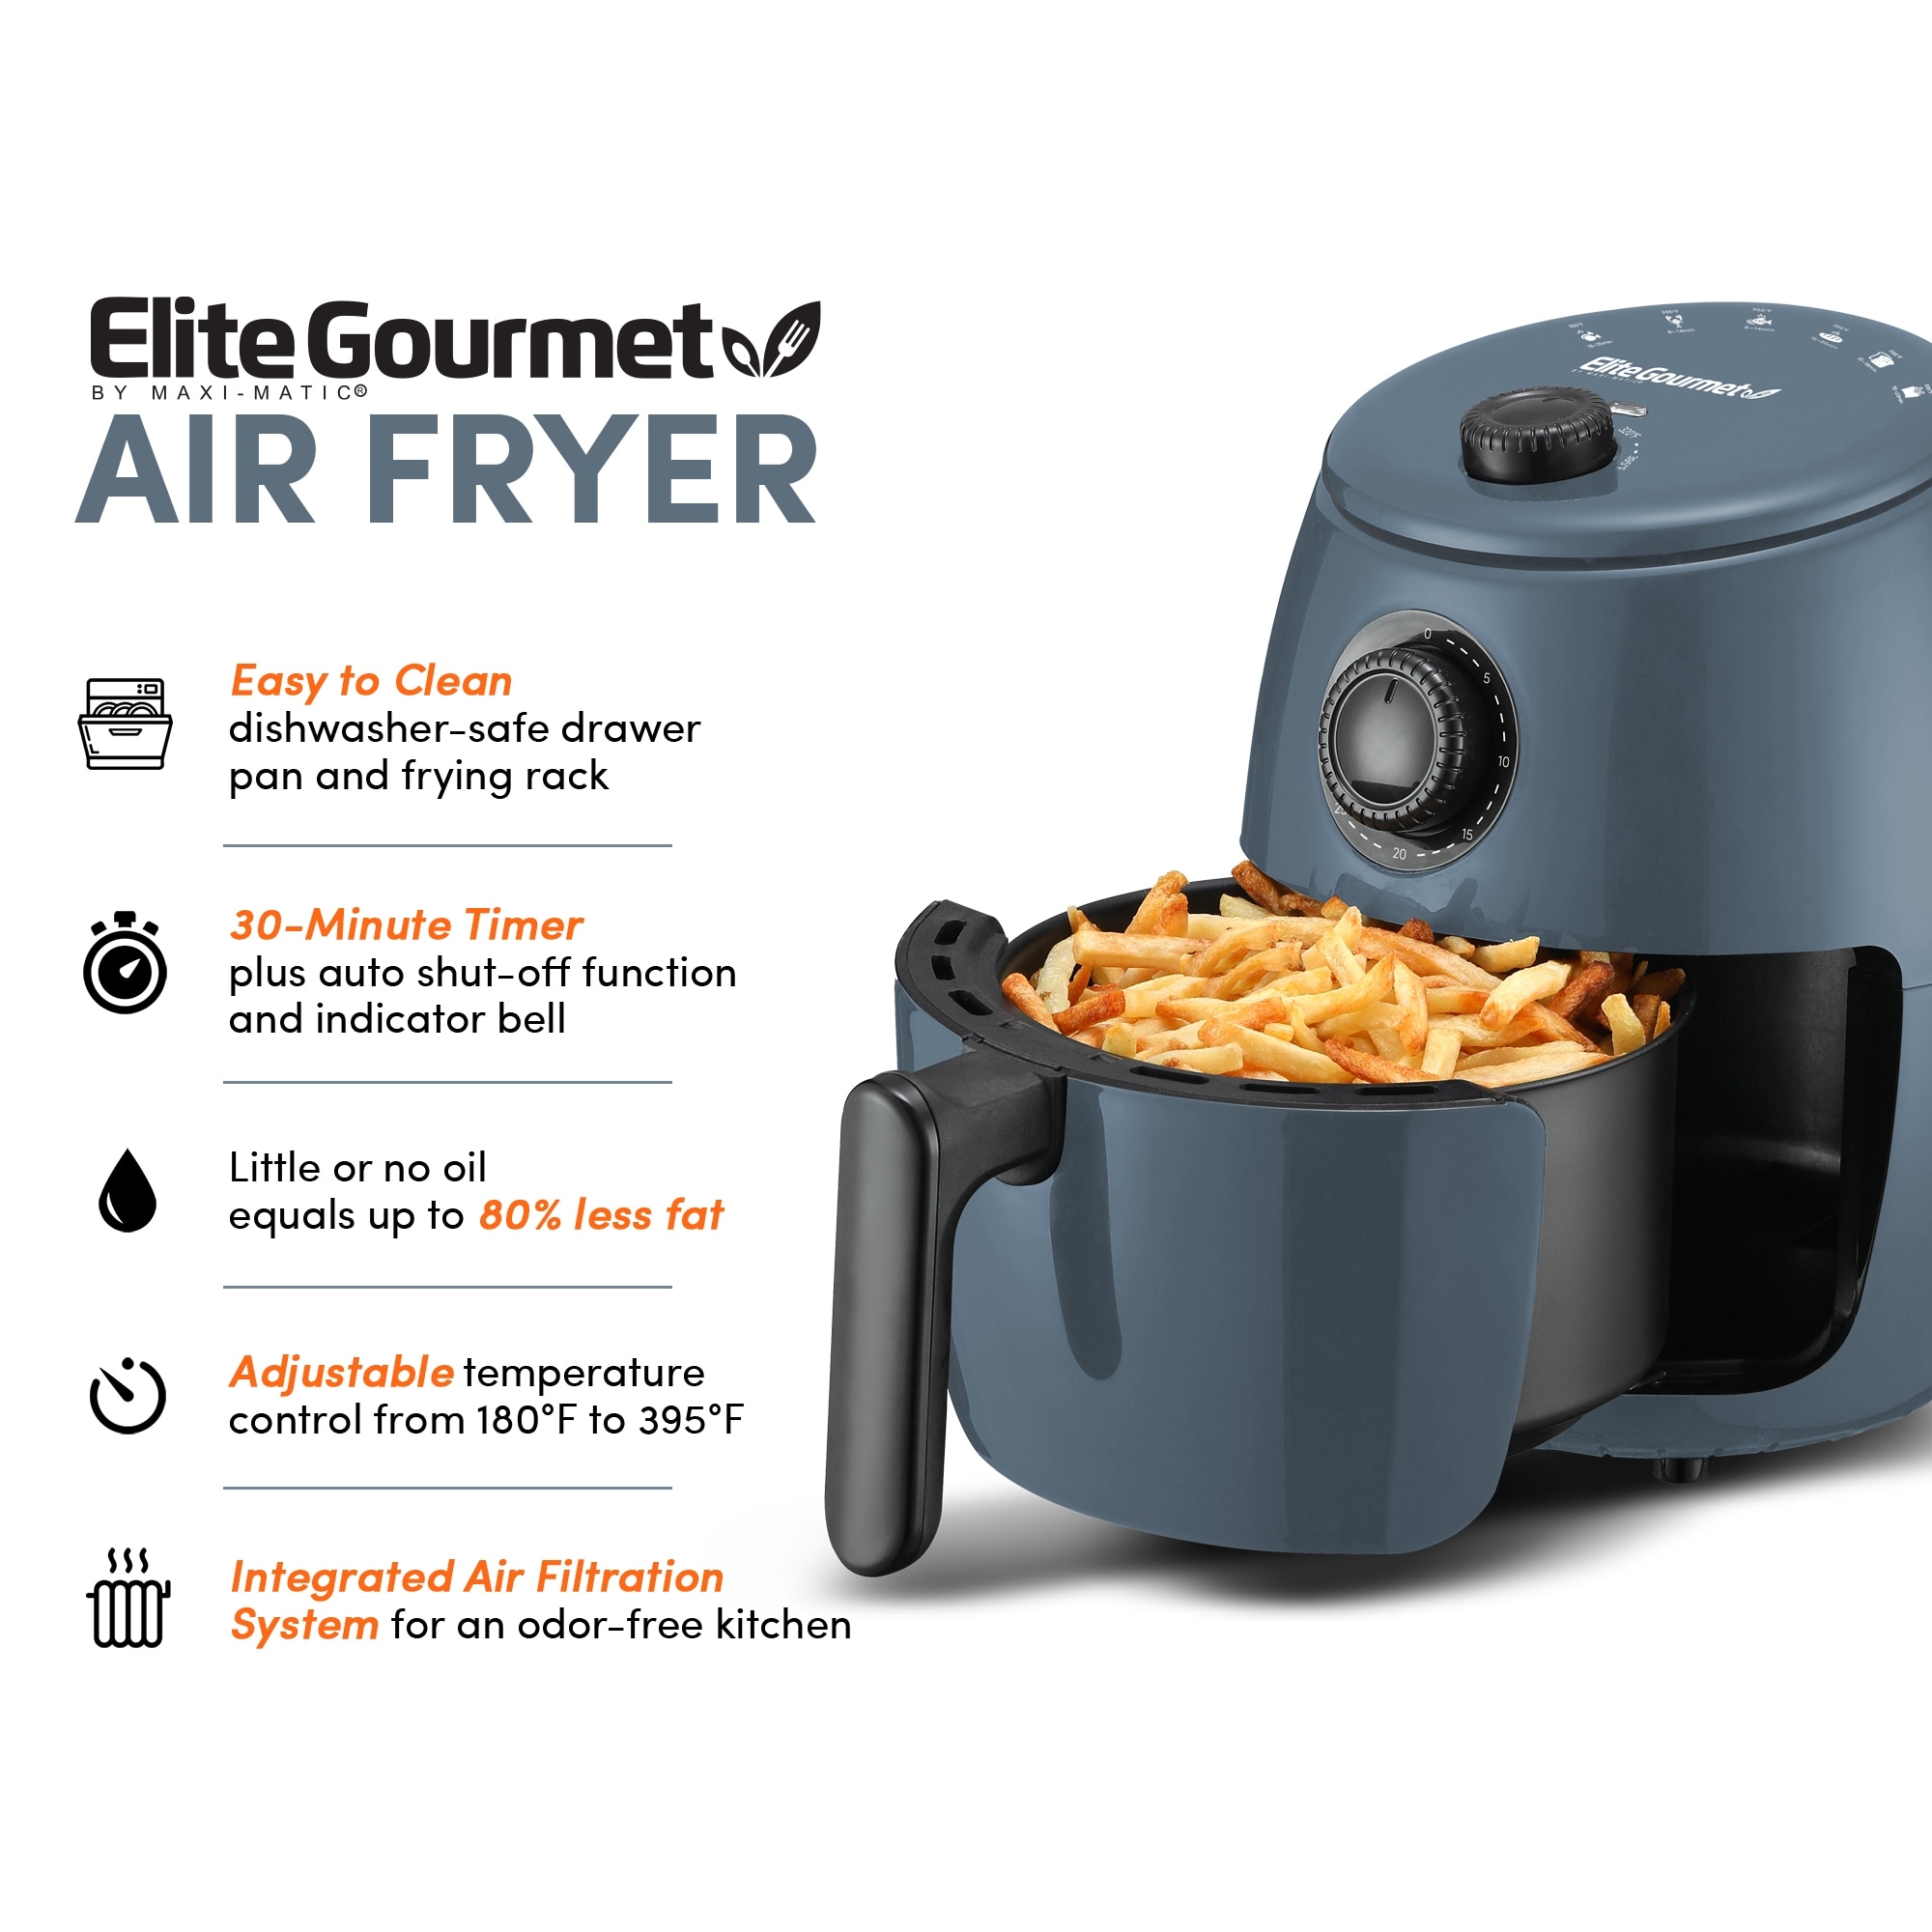 https://ak1.ostkcdn.com/images/products/is/images/direct/62312758ebbcac669c251add827bb7eaa257e503/Elite-Gourmet-2.1qt-Hot-Air-Fryer-with-Adjustable-Timer-and-Temperature-for-Oil-free-Cooking%2C-Blue-Grey.jpg